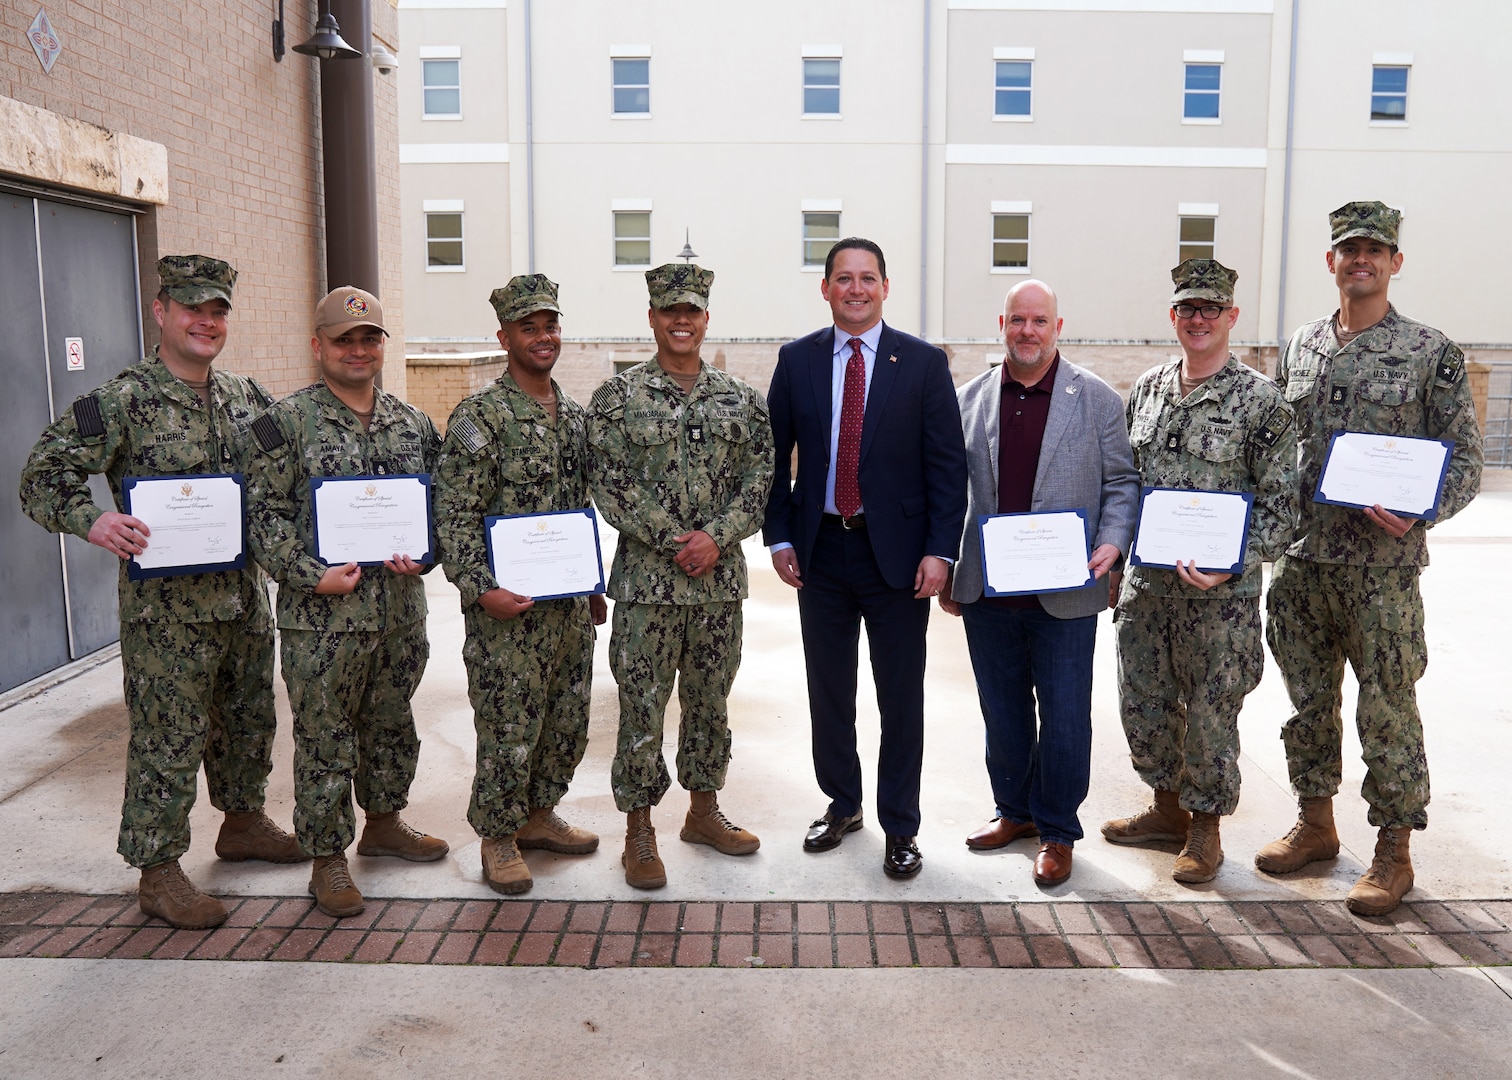 U.S. Congressman recognizes Navy Chiefs for taking care of one of their ...